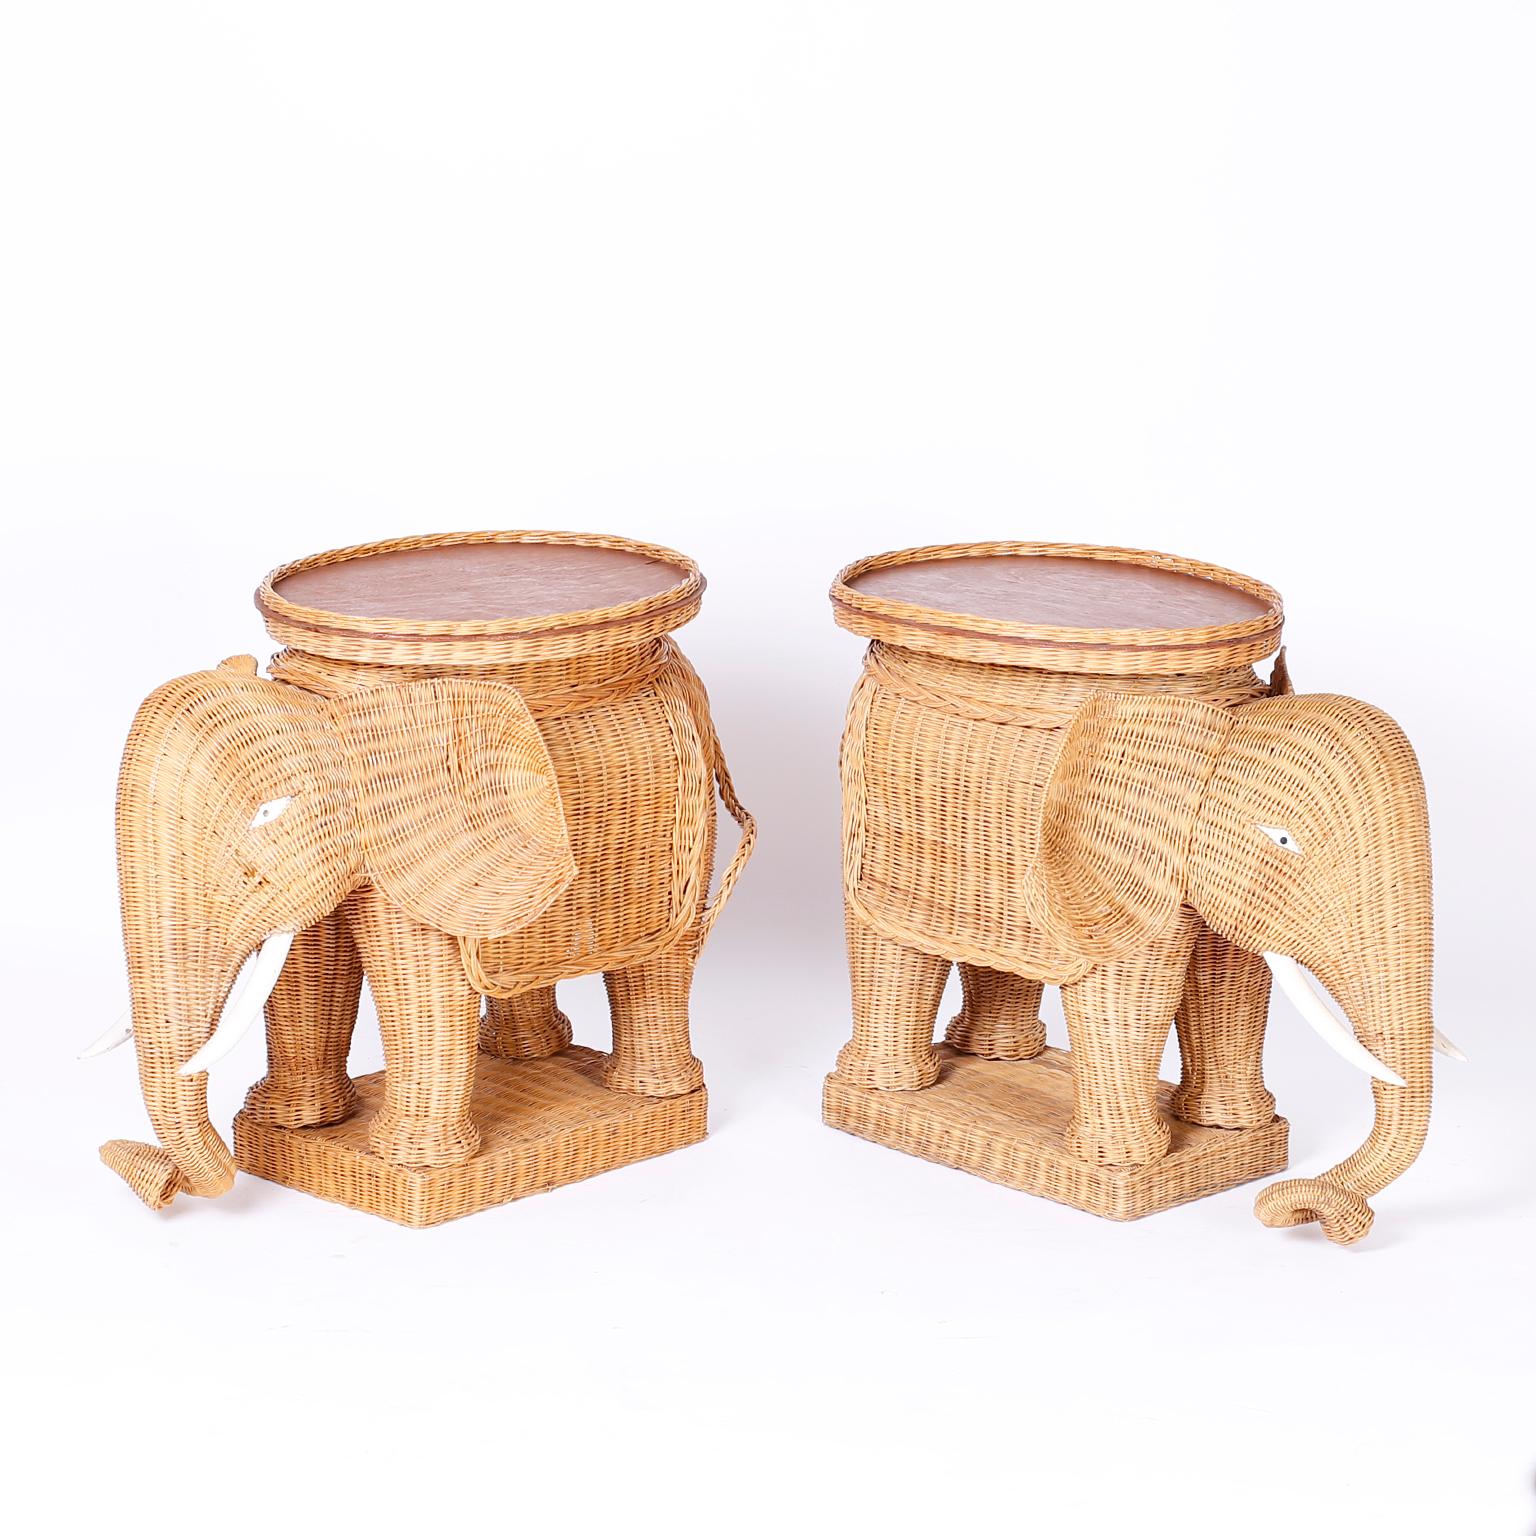 Pair of wicker elephant stands in rare immaculate condition, with wood tusks on wicker bases with removable serving trays on top.